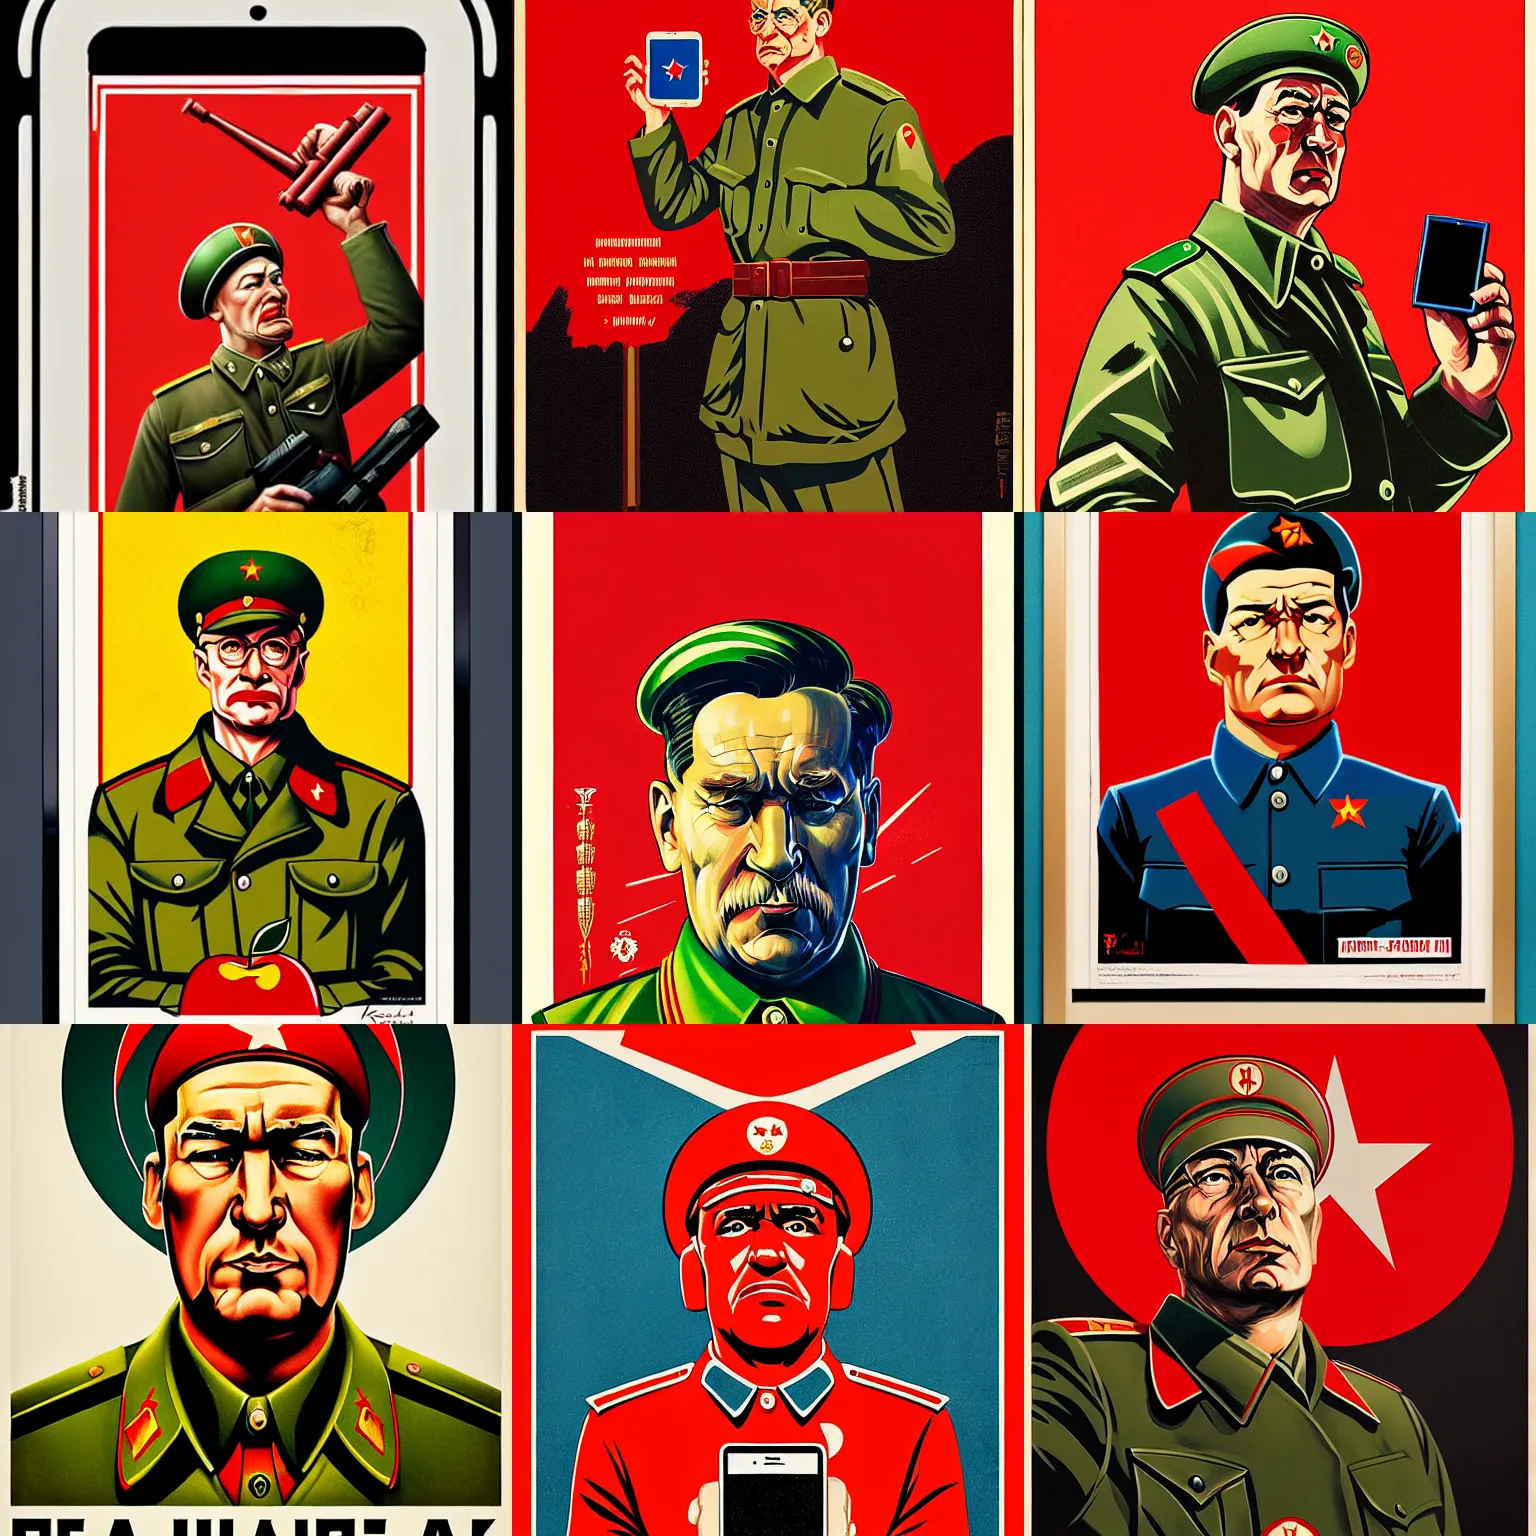 Prompt: a wwii soviet propaganda portrait advertising an apple iphone by rei kamoi and dan mumford and robin eley, communist hammer and sickle